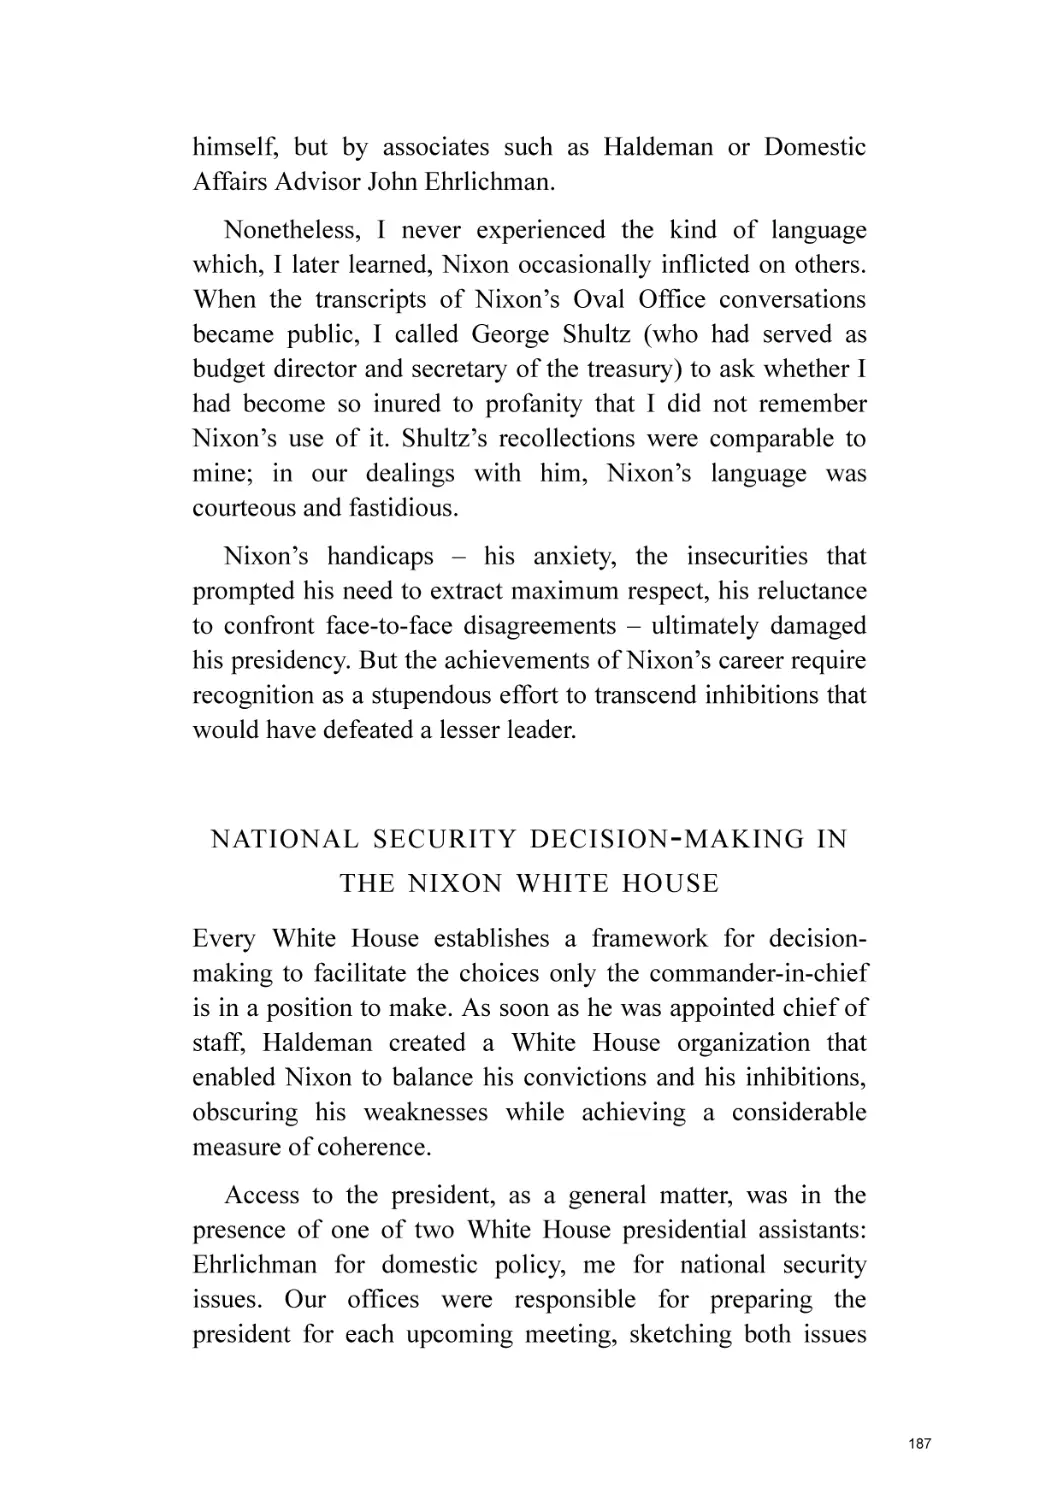 National Security Decision-making in the Nixon White House